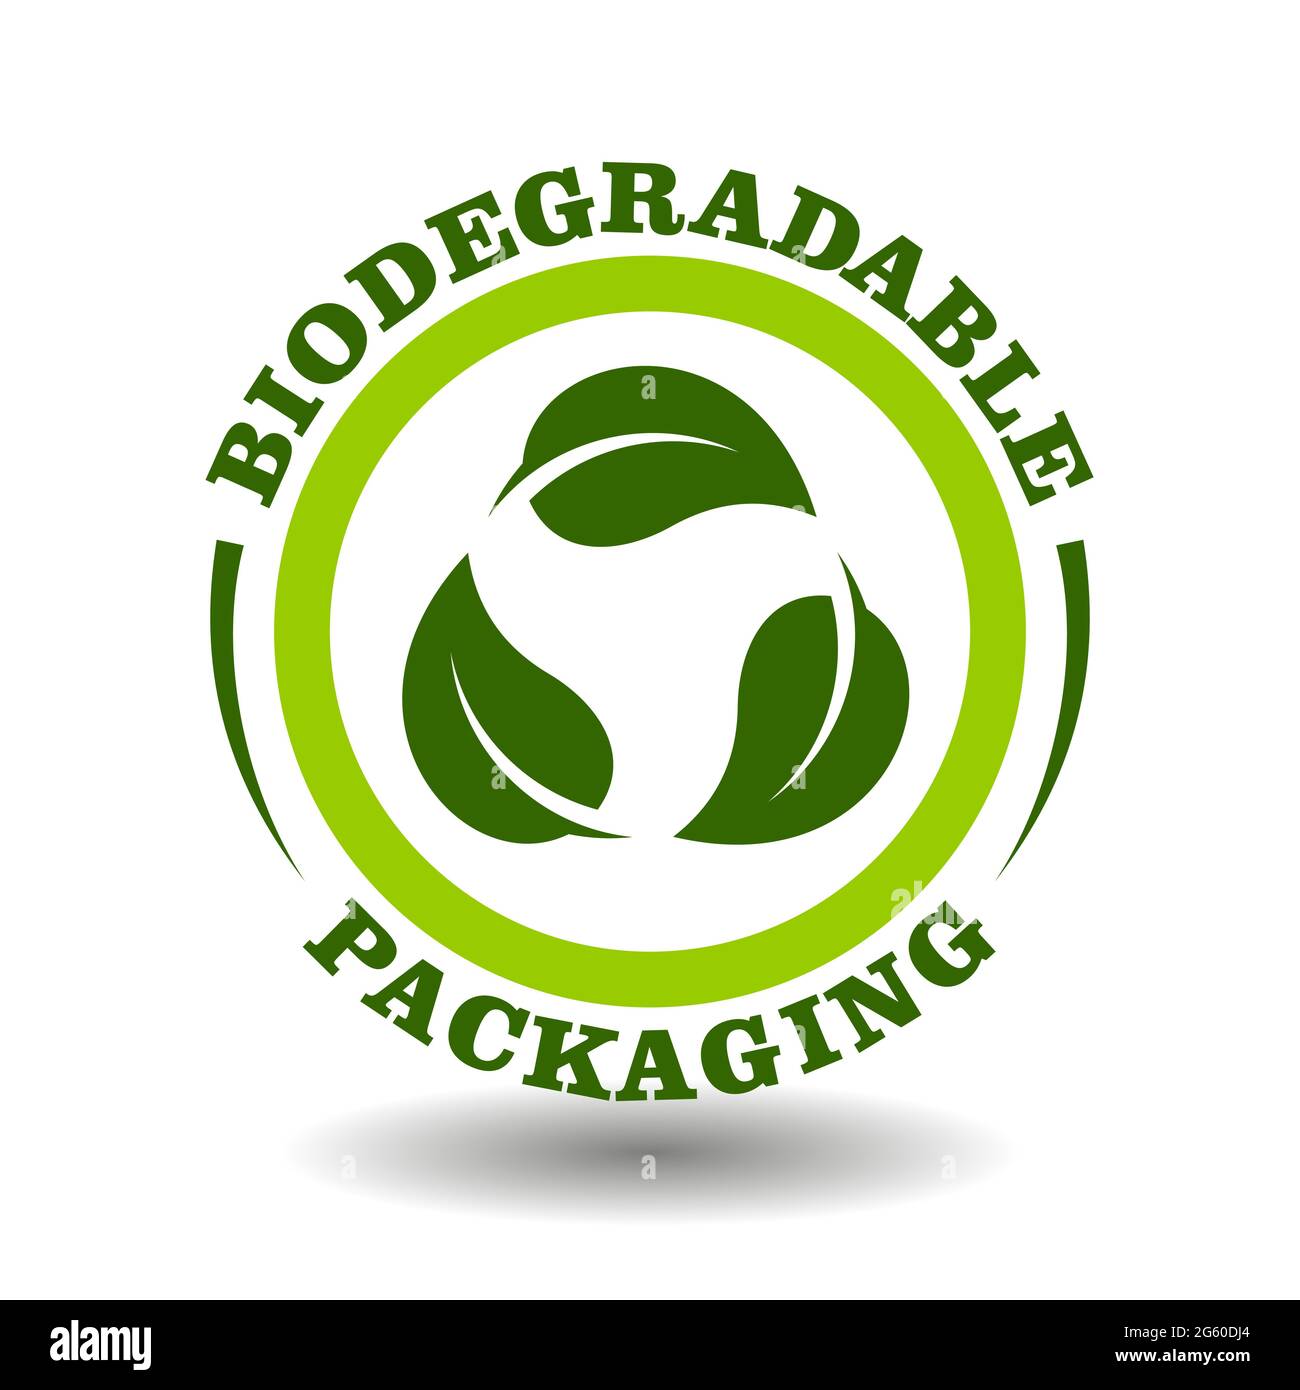 Simple circle logo Biodegradable packaging with green leaves recycling arrows symbol in vector round icon for plastic free products labeling. Creative Stock Vector